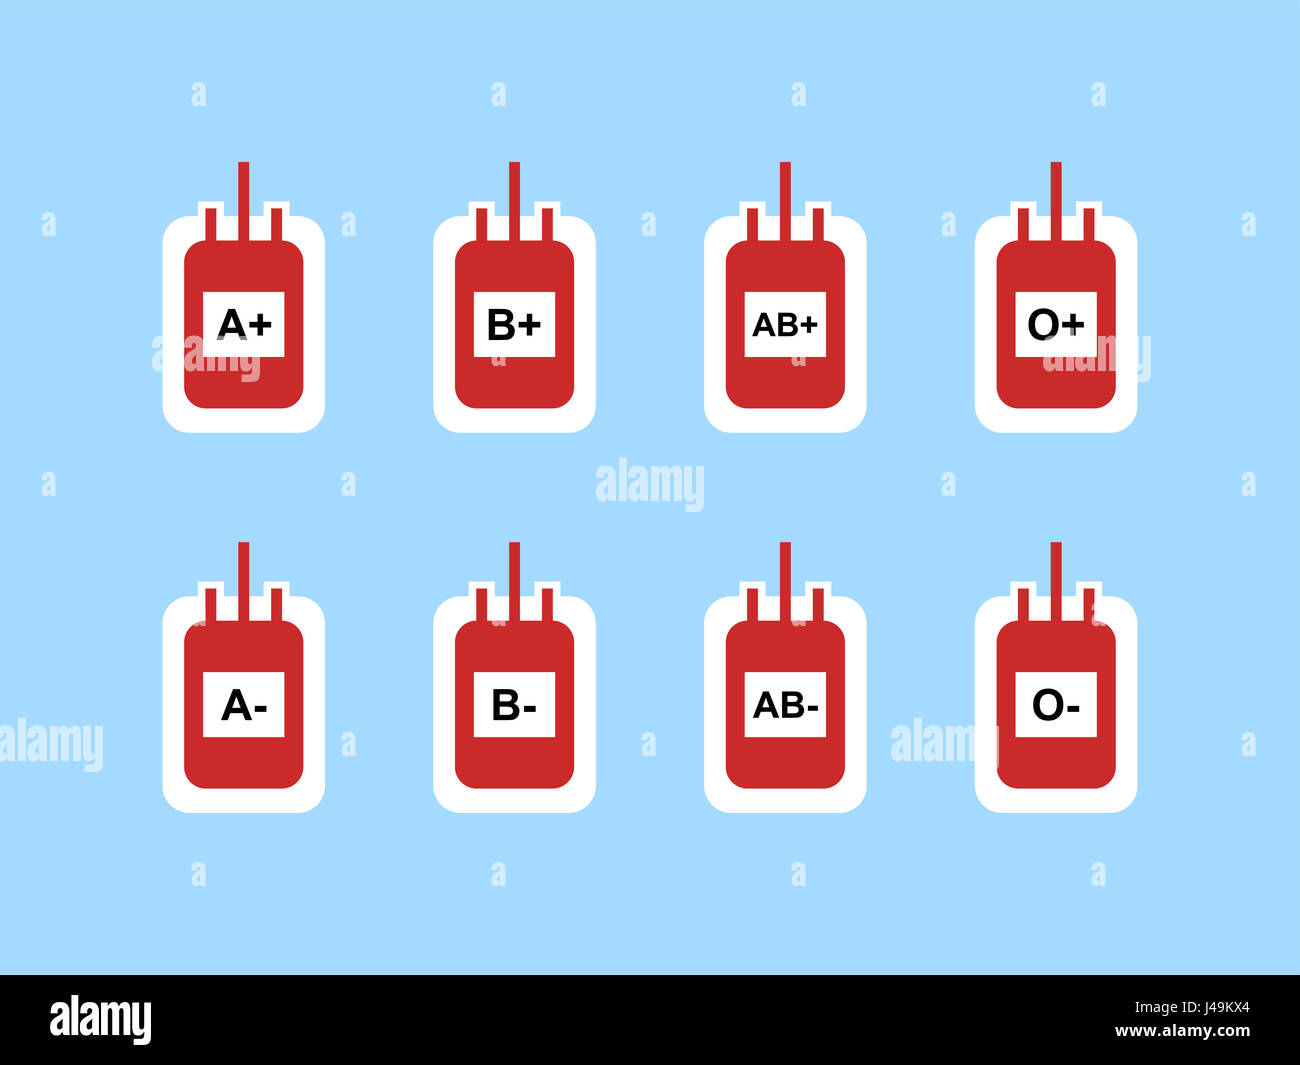 Blood Bags Sign Symbol Icon for Blood Type A+, A-, B+, B-, AB+, AB-, O+ and  O- Vector Illustration Stock Photo - Alamy